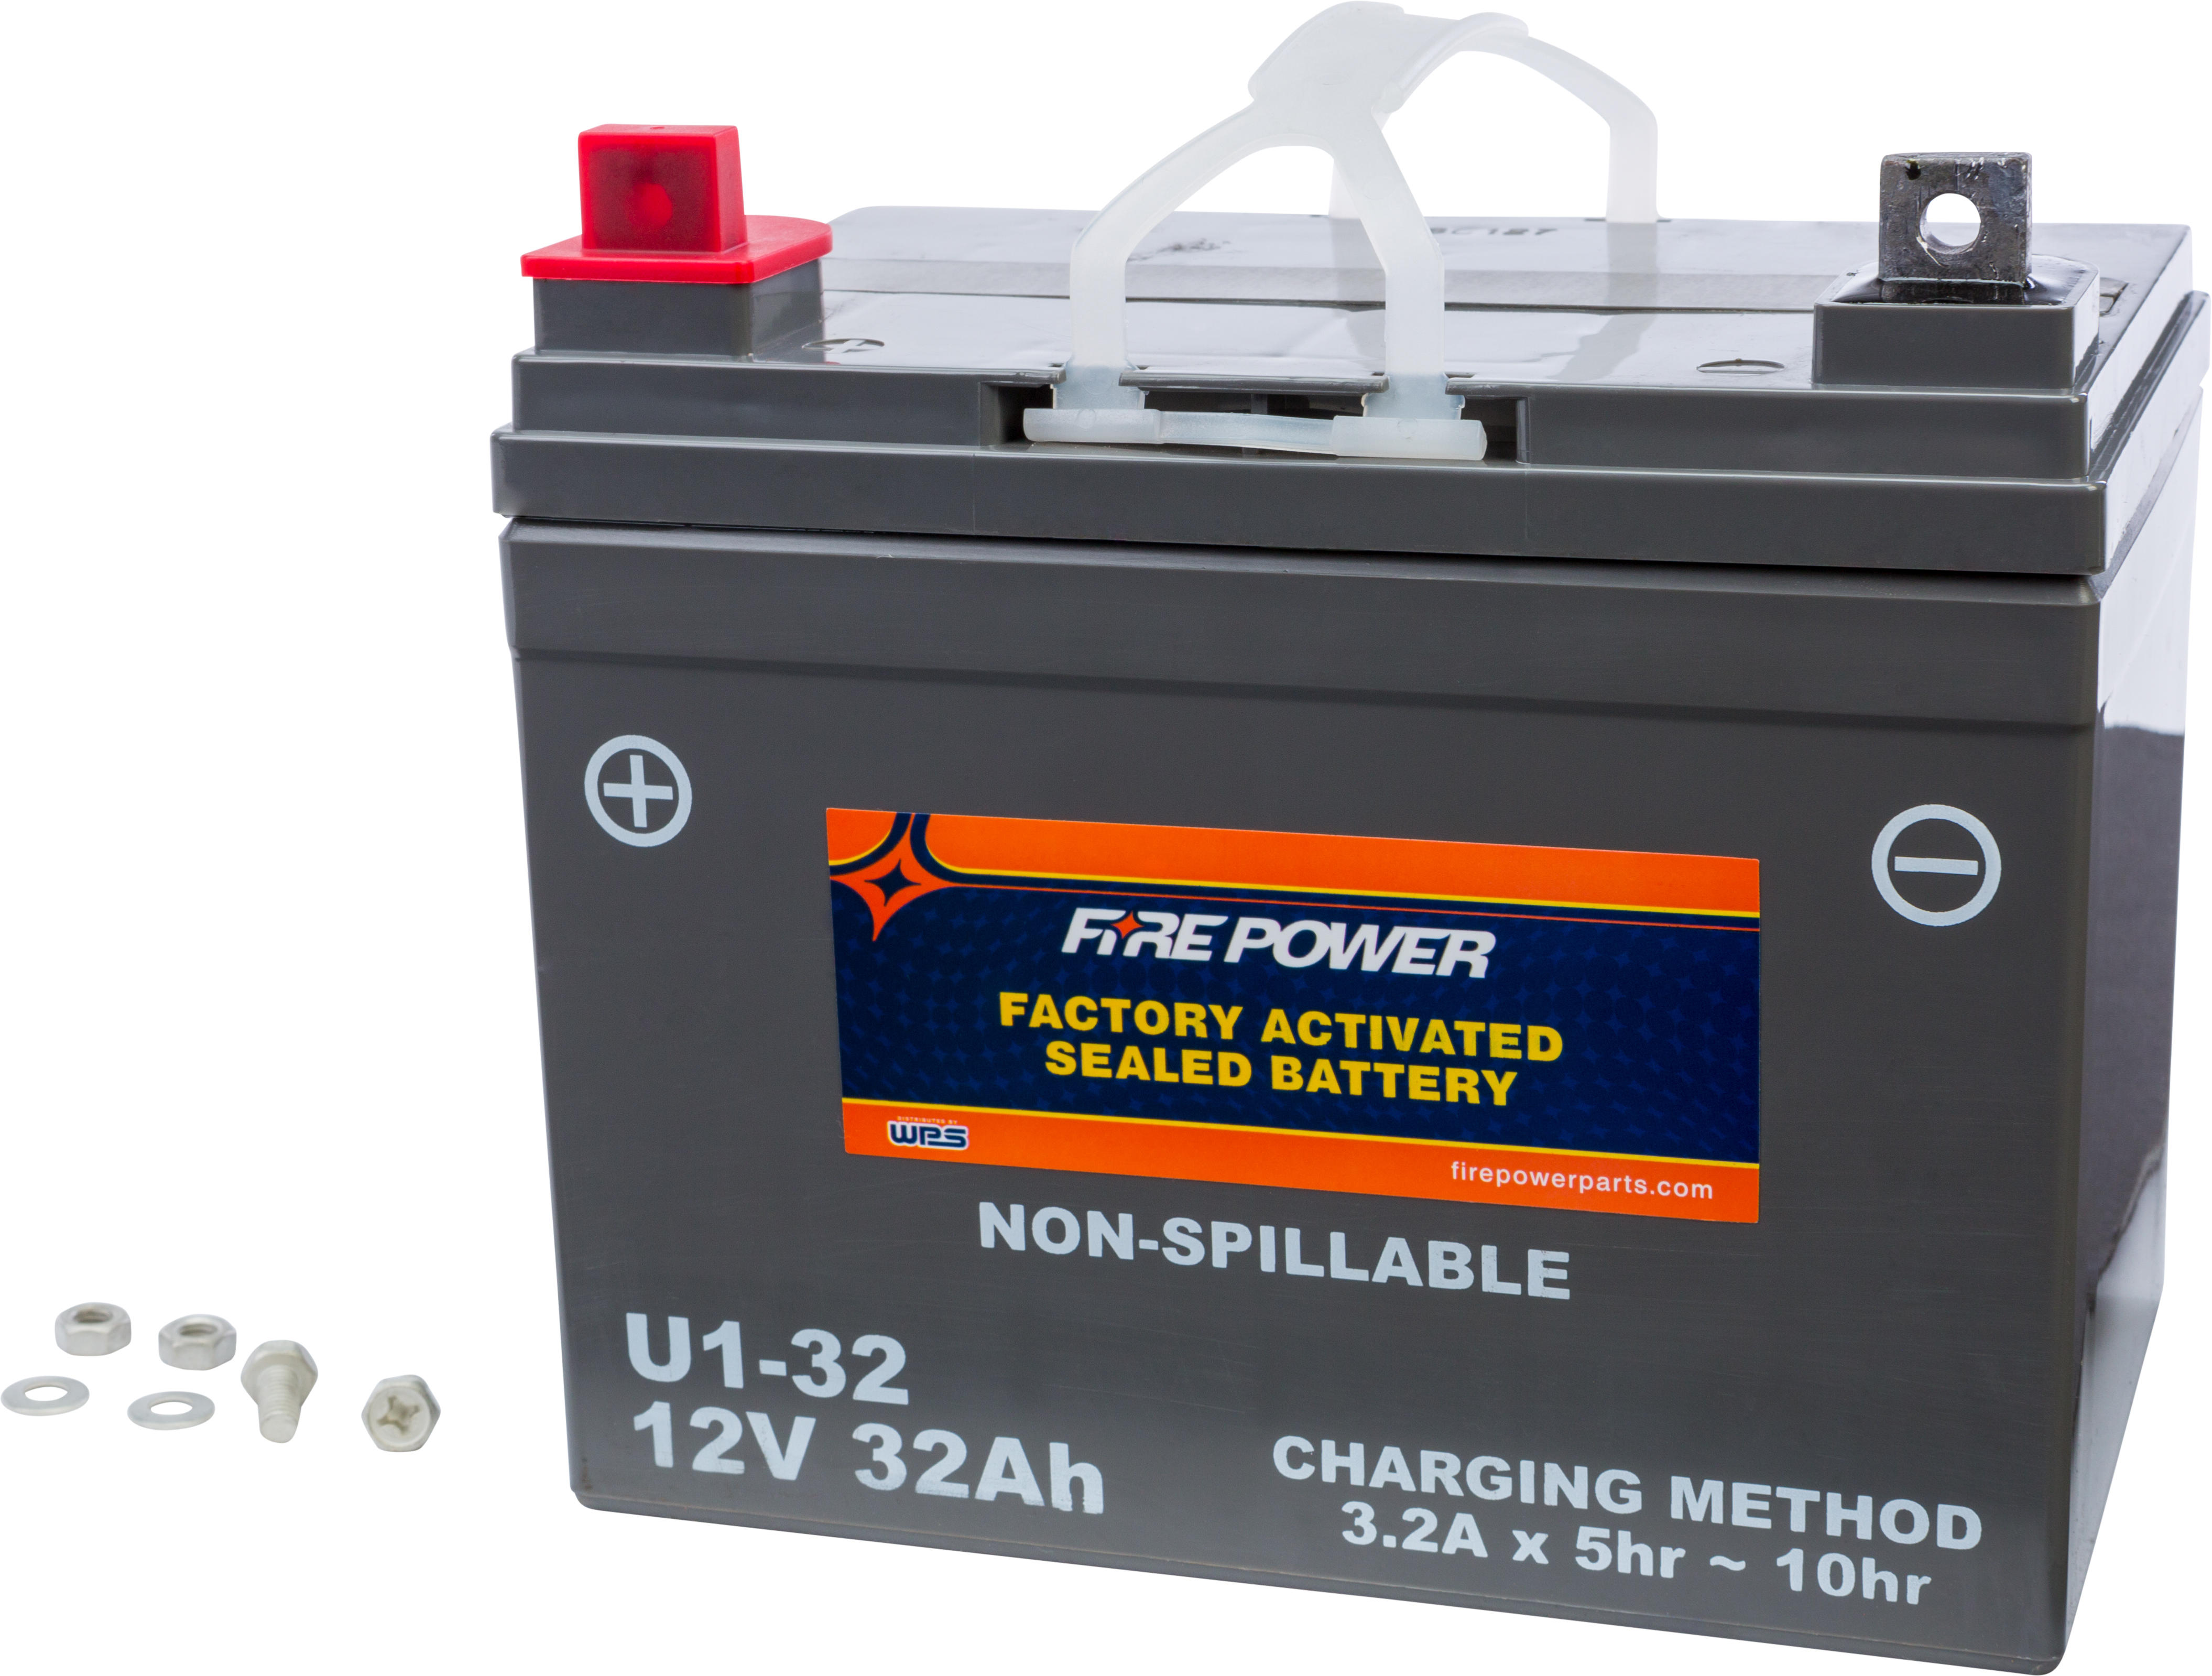 Factory Activated Sealed Battery - Replaces U1-32 - Click Image to Close